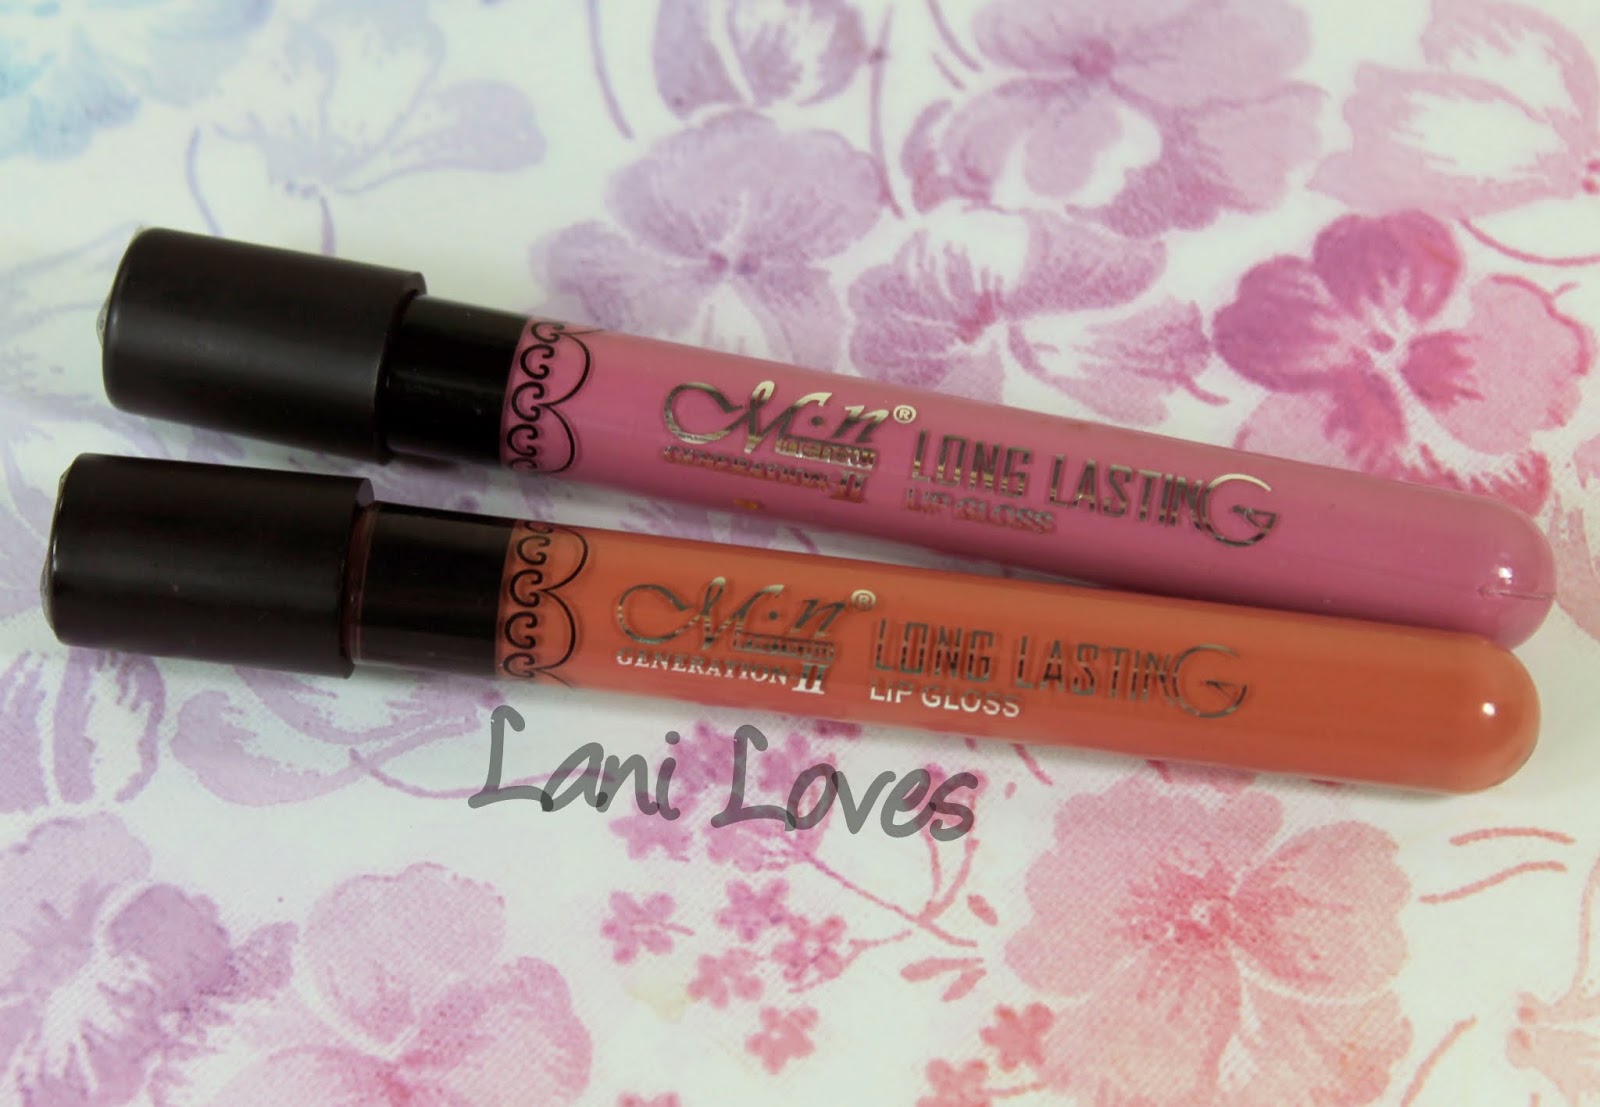 MeNow Generation II Long Lasting Lipgloss - #16 and #26 Swatches & Review